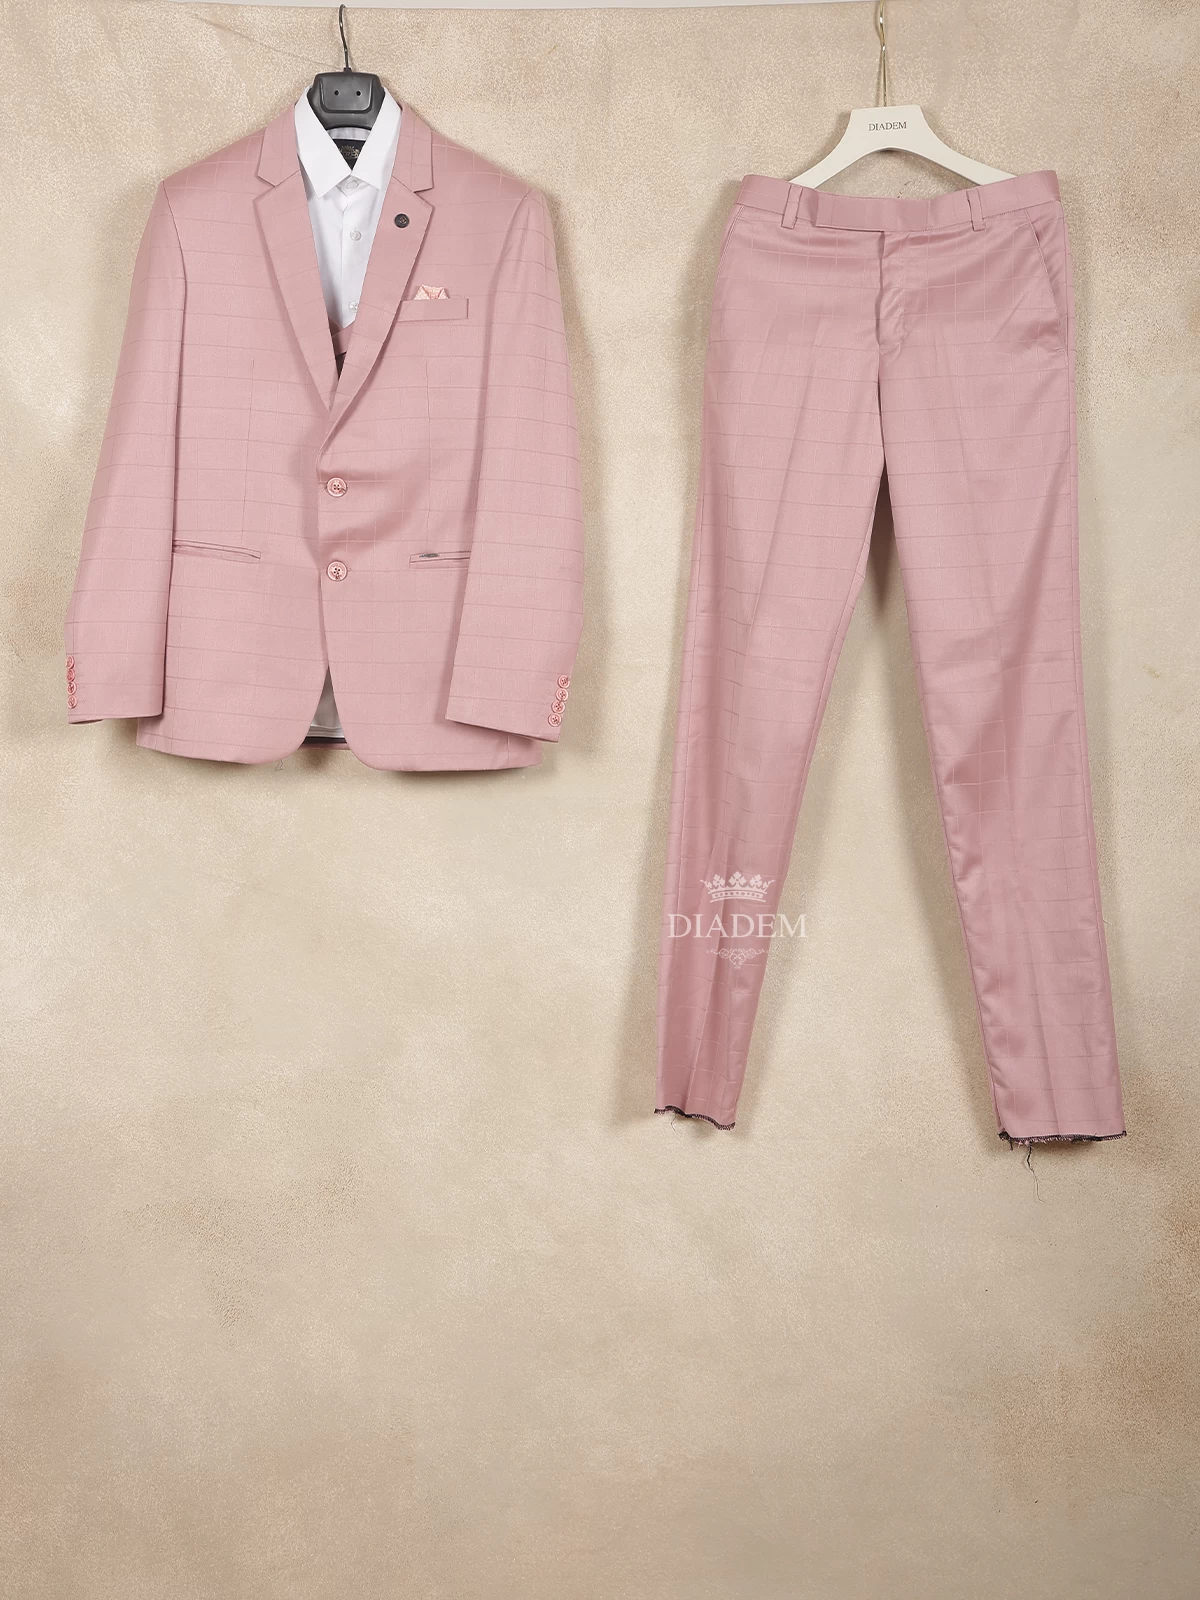 Light Pink Cotton Blend Coat Suit Paired with Matching Tie